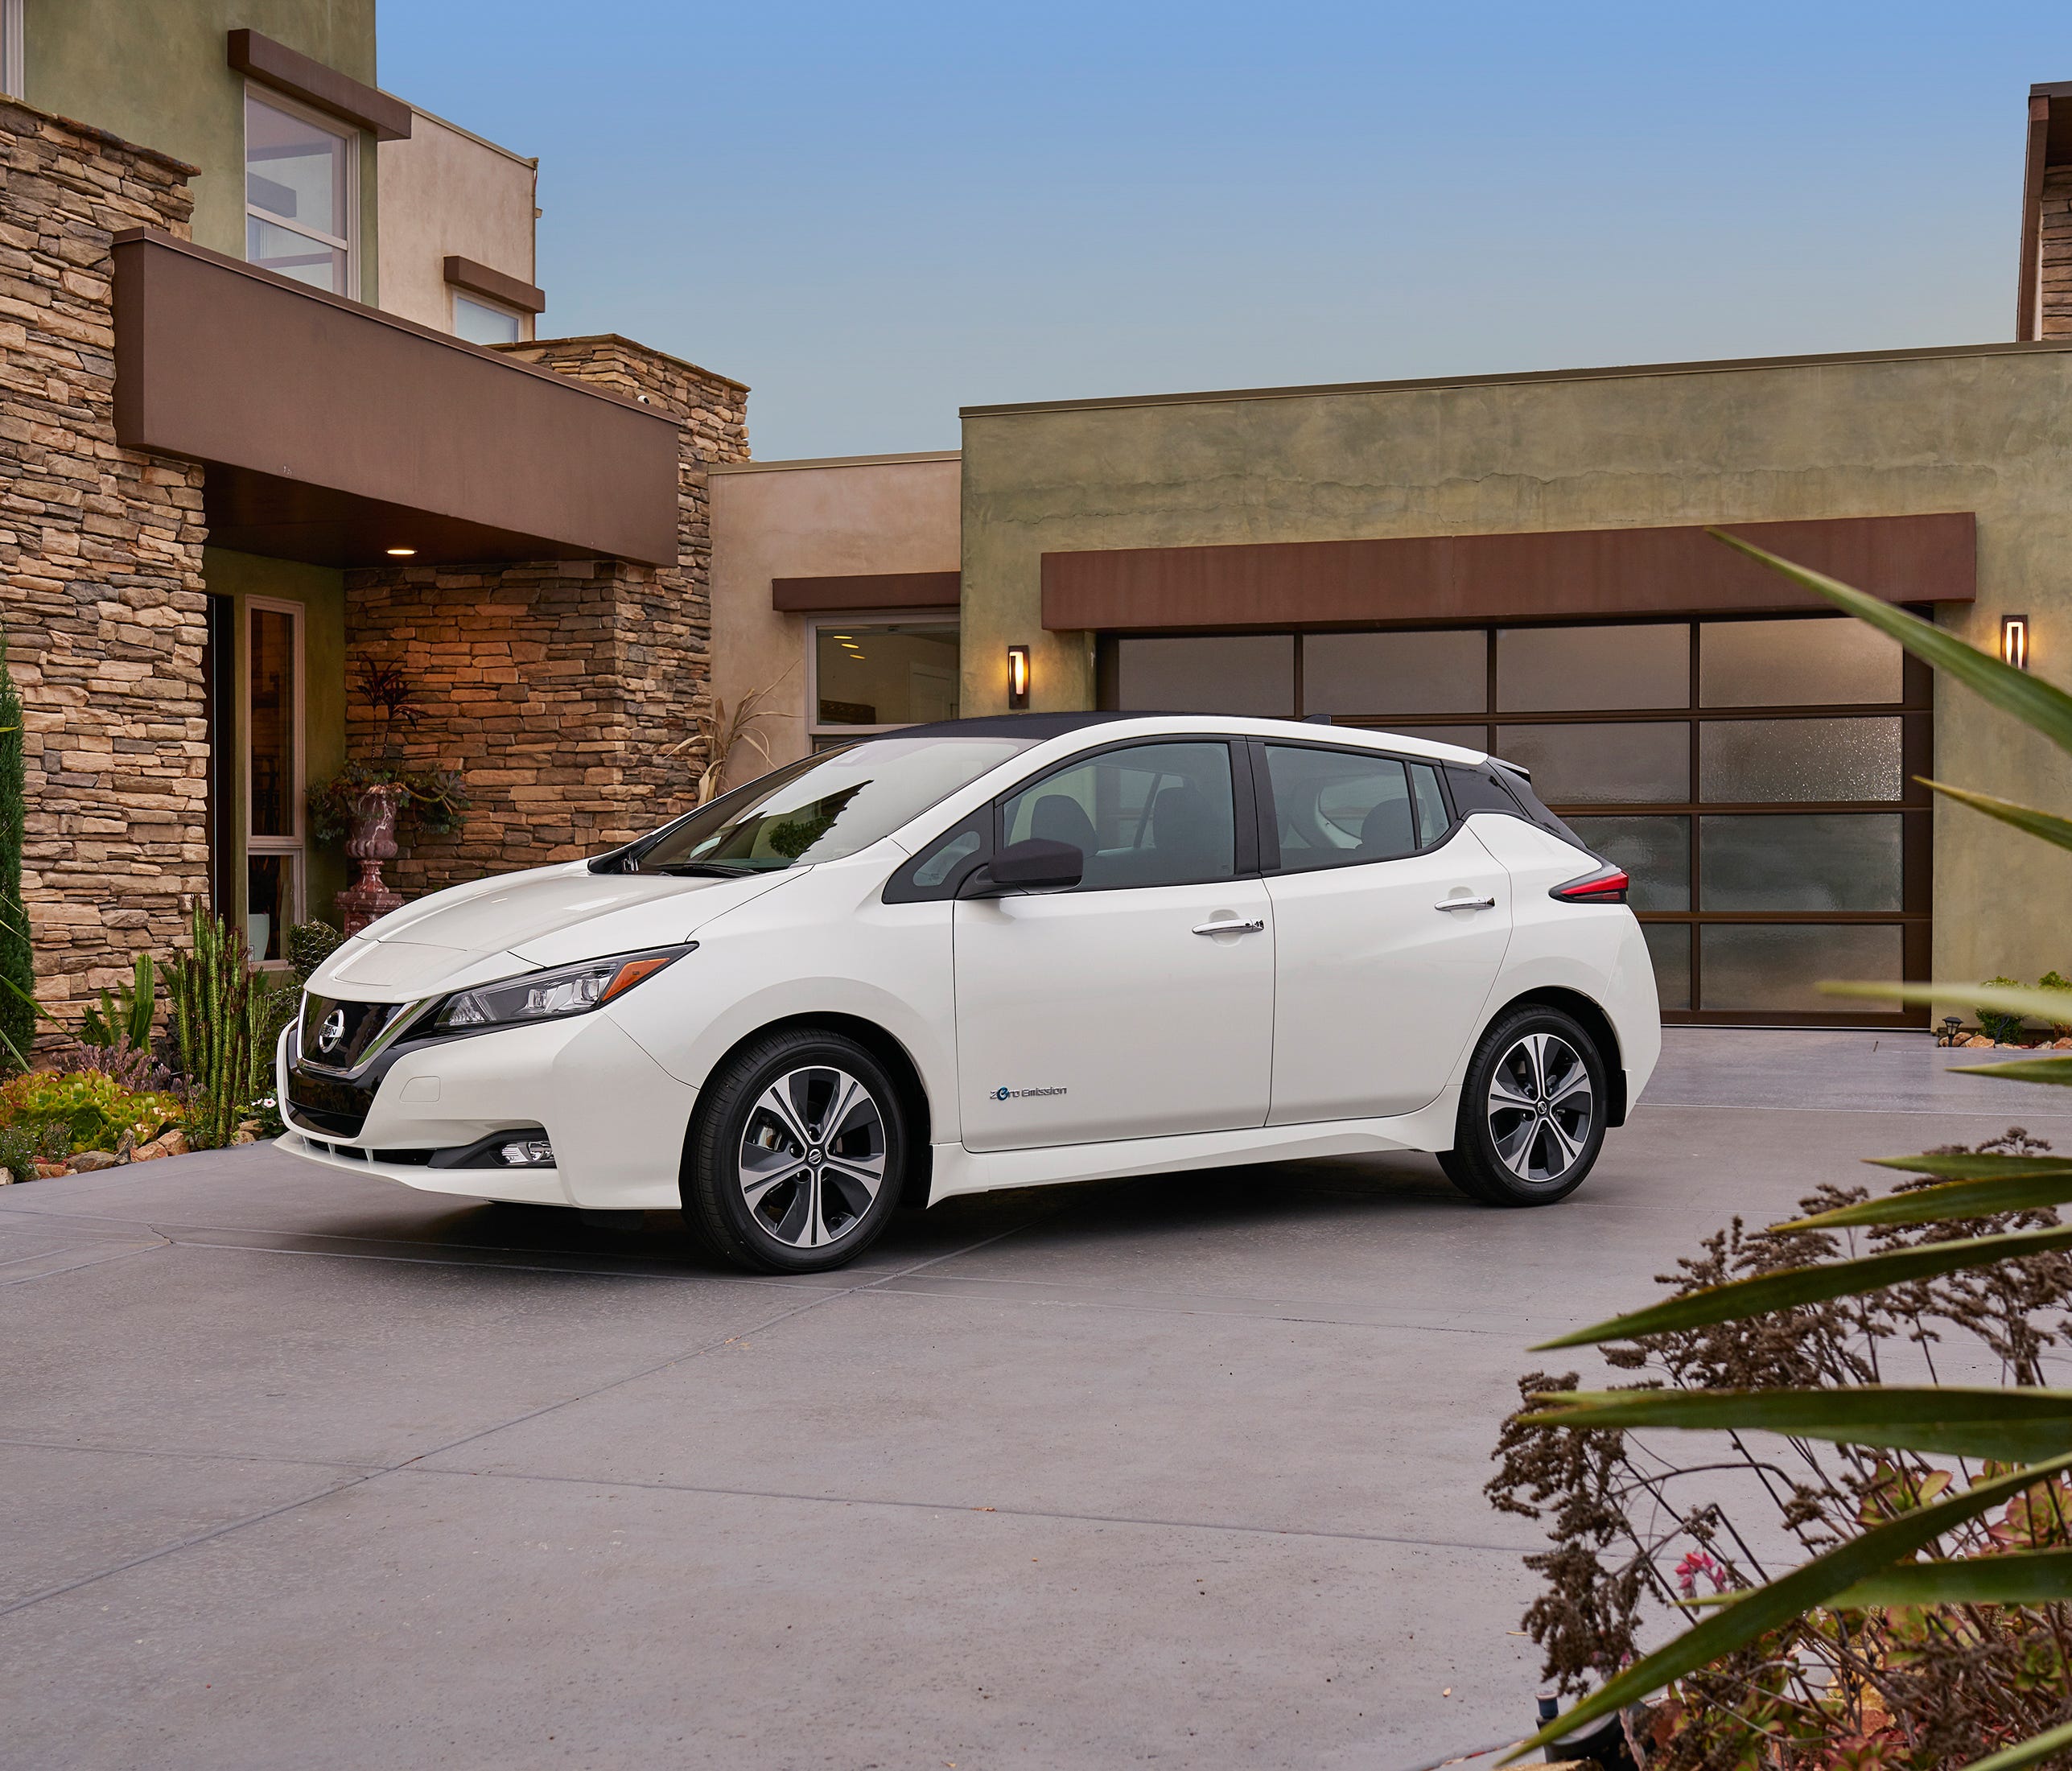 The redesigned 2018 Nissan Leaf.